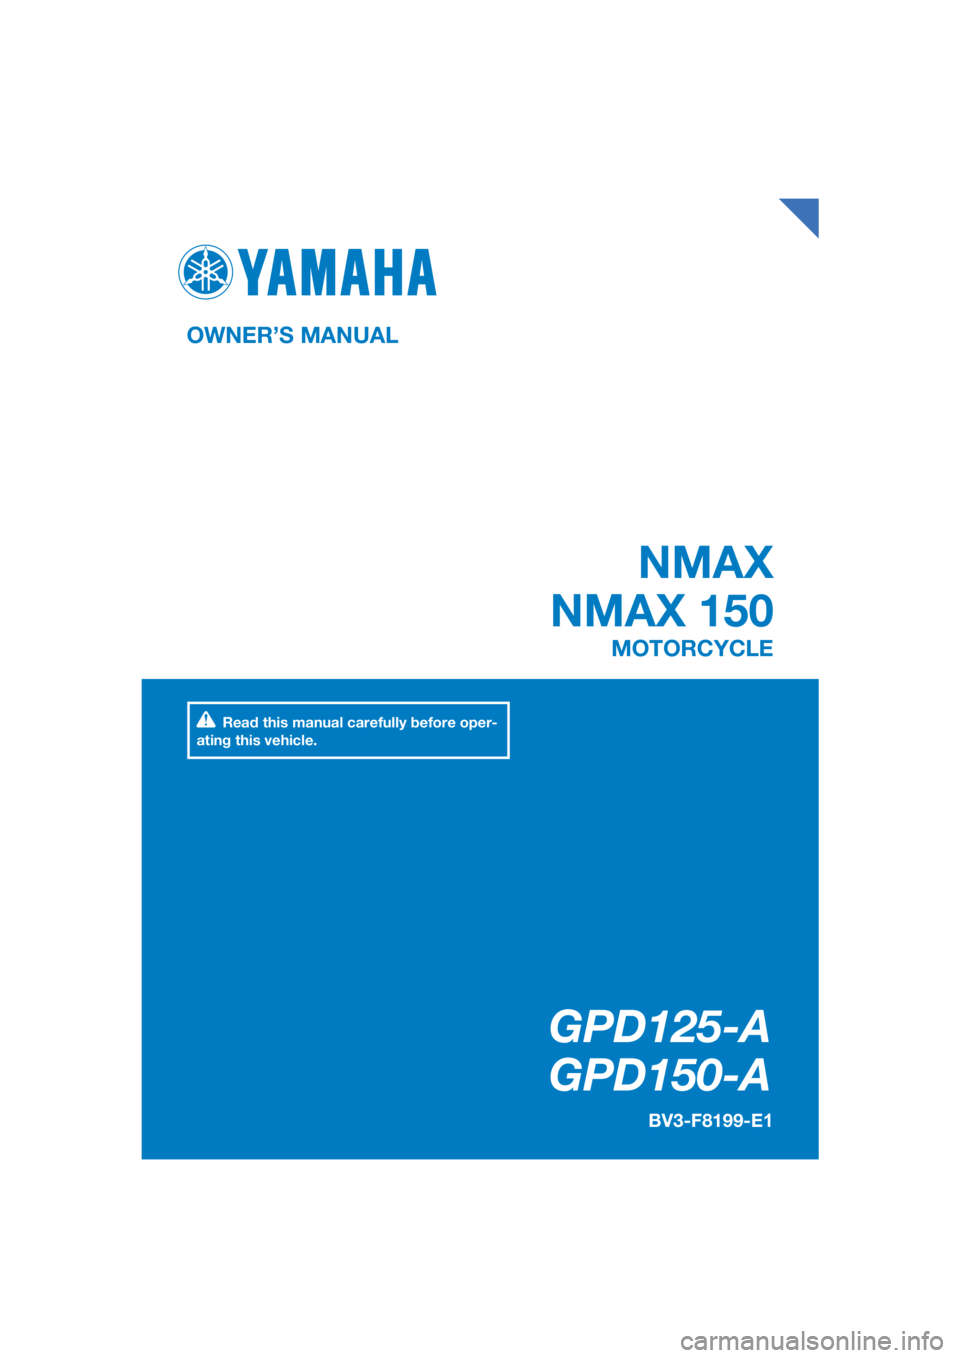 YAMAHA NMAX 150 2019  Owners Manual DIC183
GPD125-A
   GPD150-A
OWNER’S MANUAL BV3-F8199-E1
MOTORCYCLE
[English  (E)]
Read this manual carefully before oper-
ating this vehicle.
 NMAX
NMAX 150 